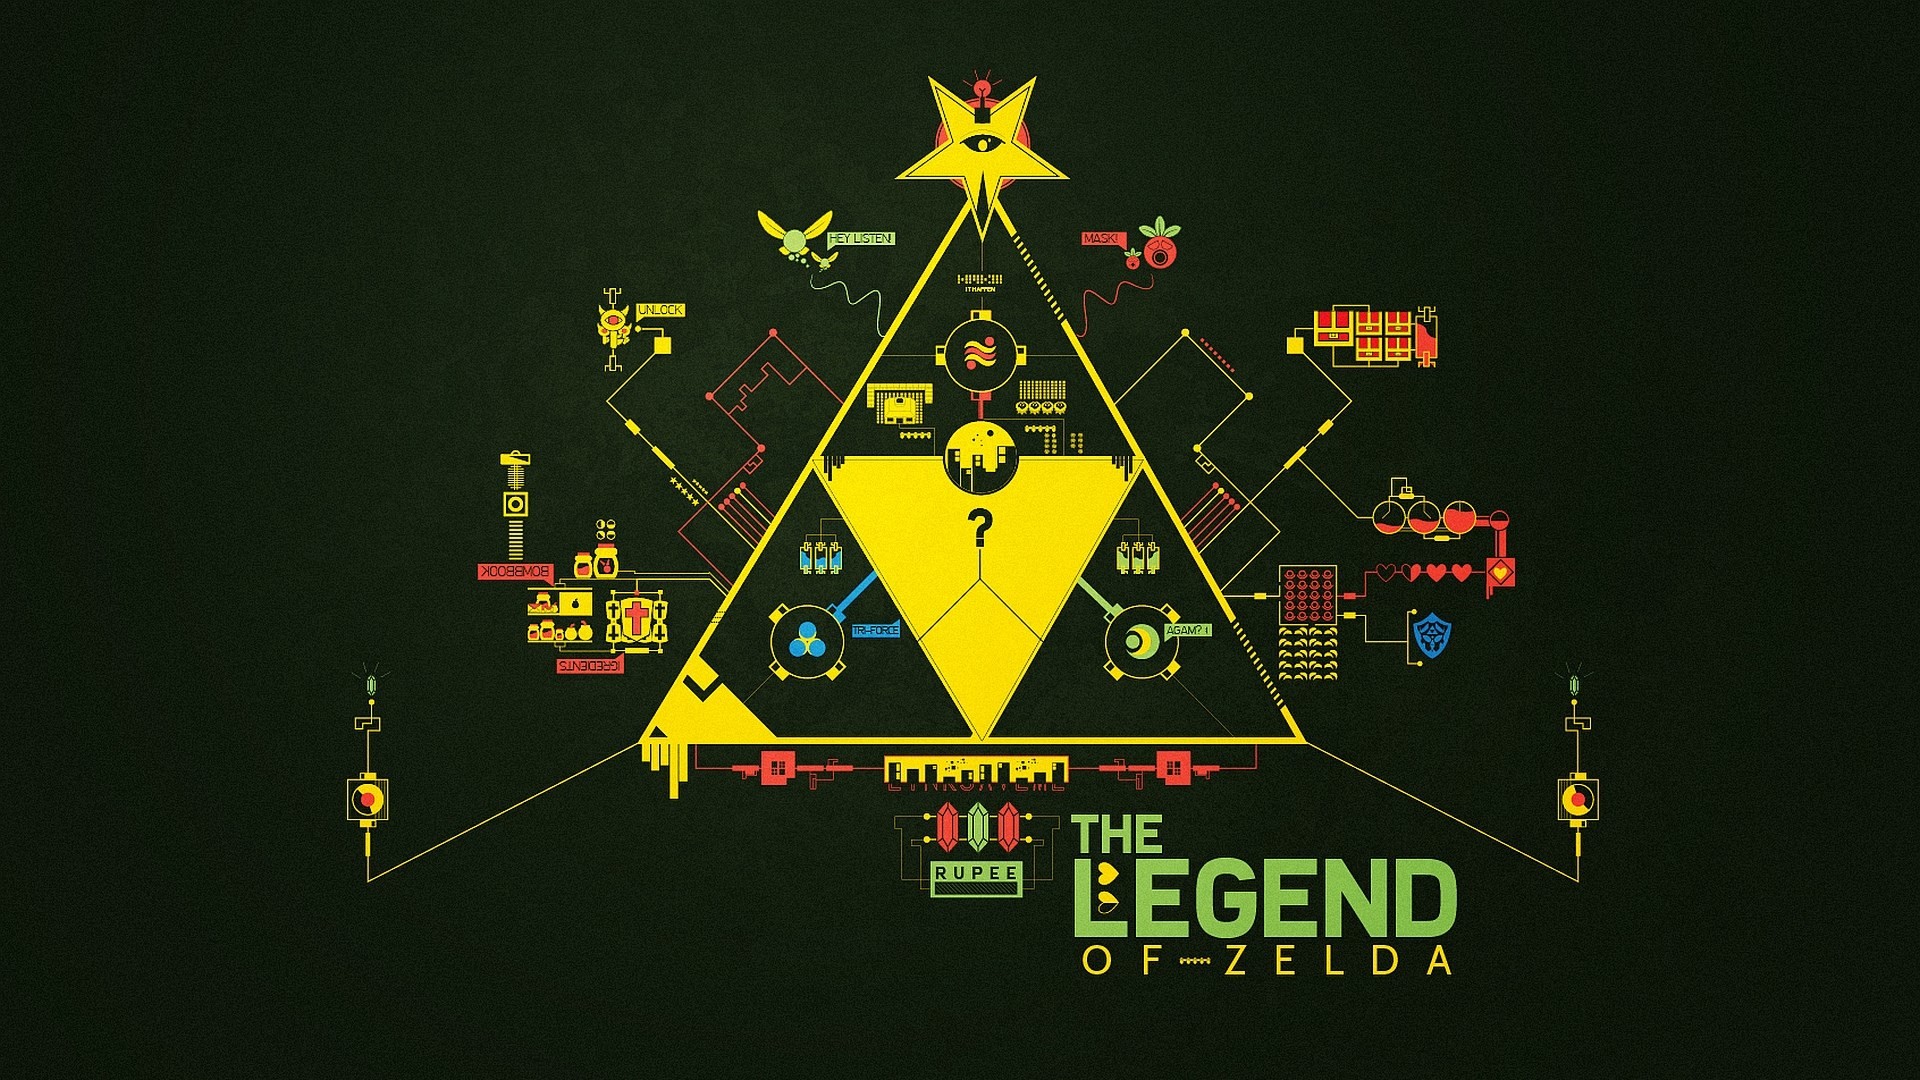 Free wallpaper and screensavers for the legend of zelda